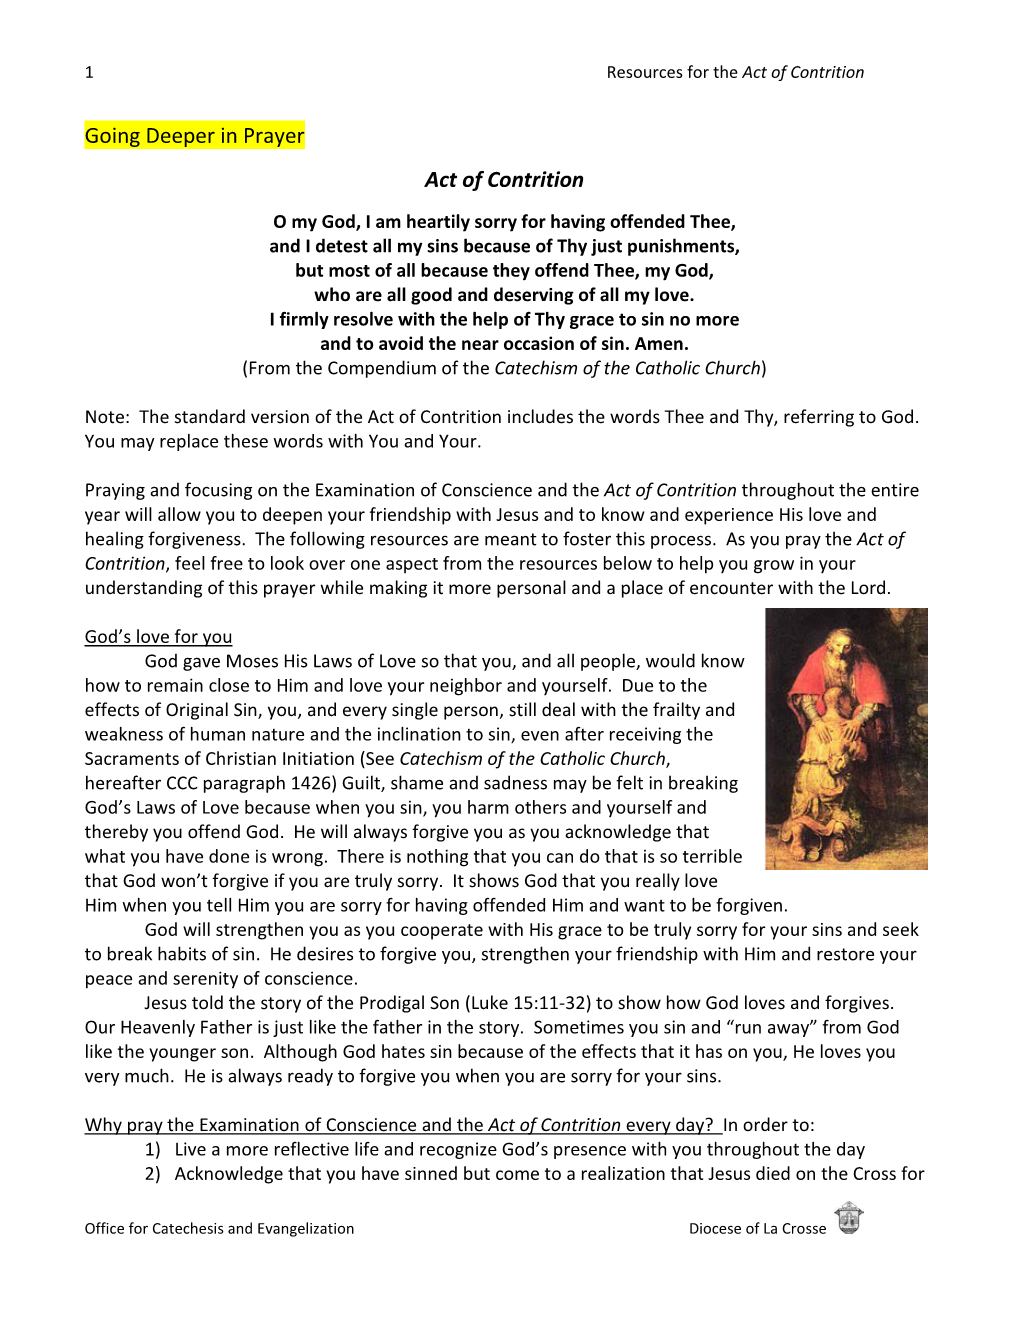 Going Deeper in Prayer Act of Contrition